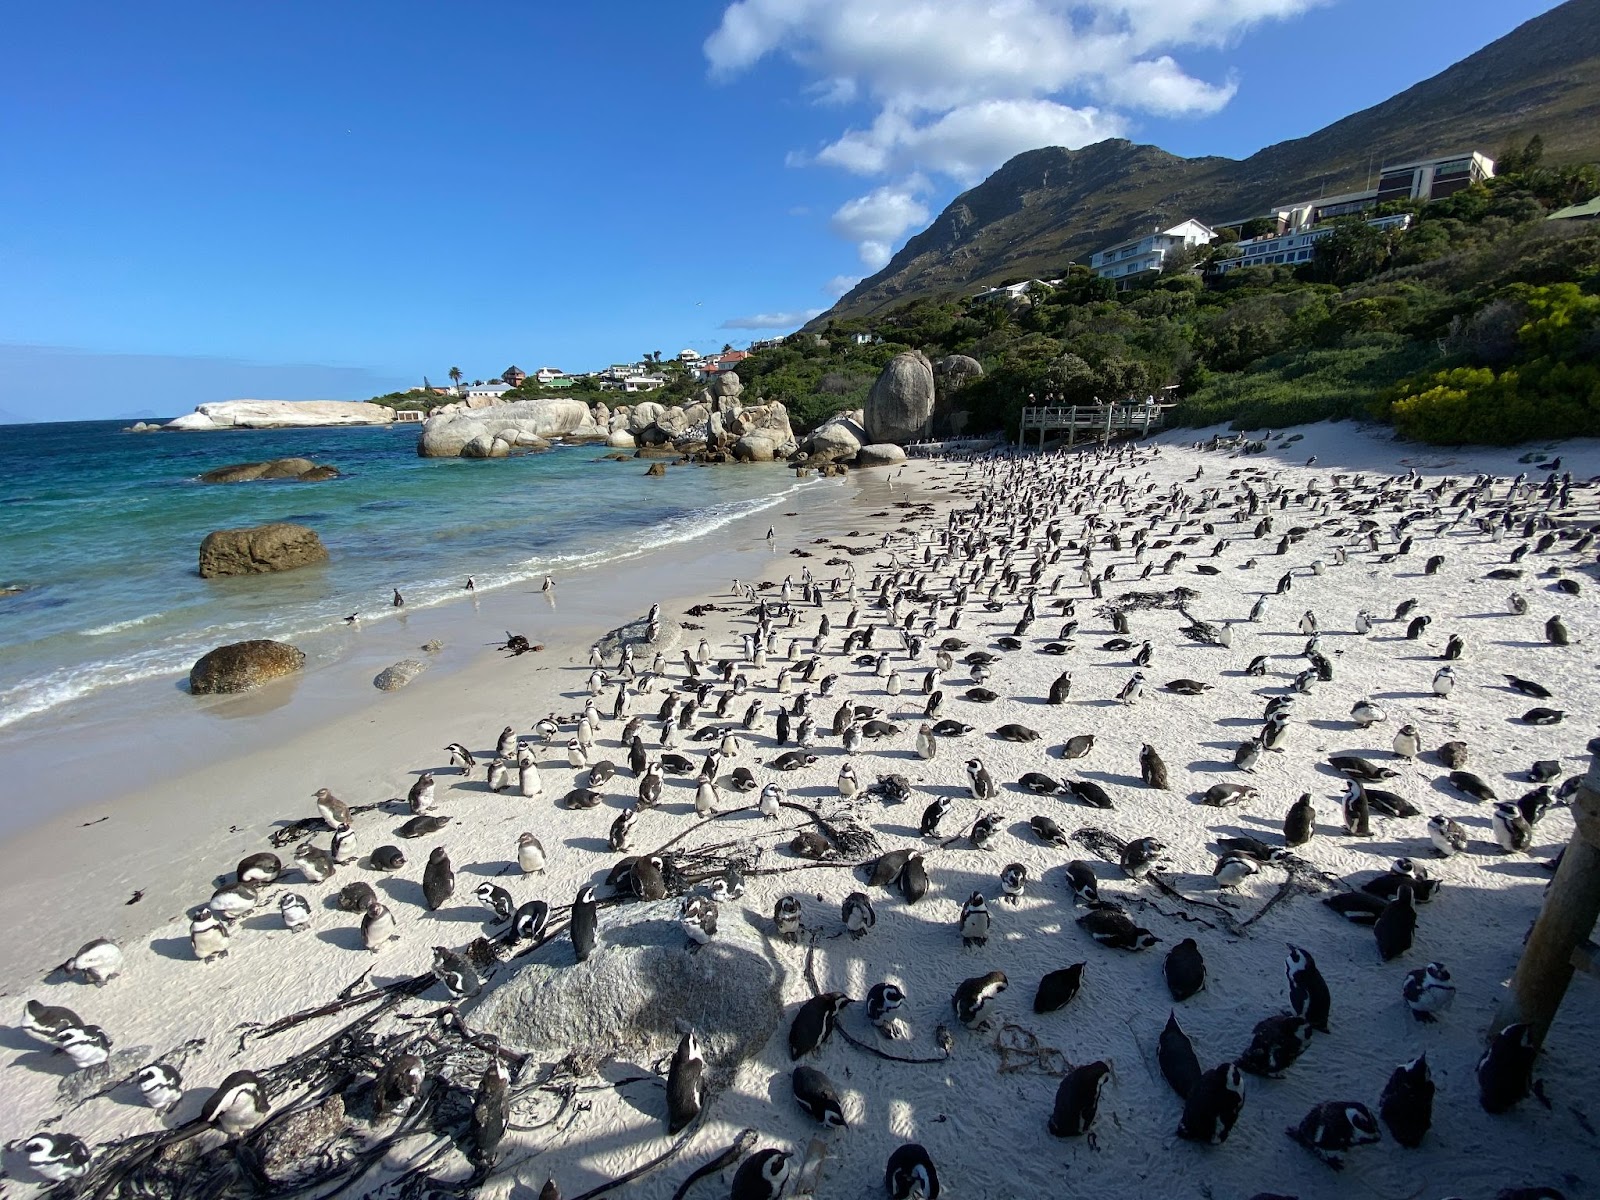 View the penguins in Simon’s Town